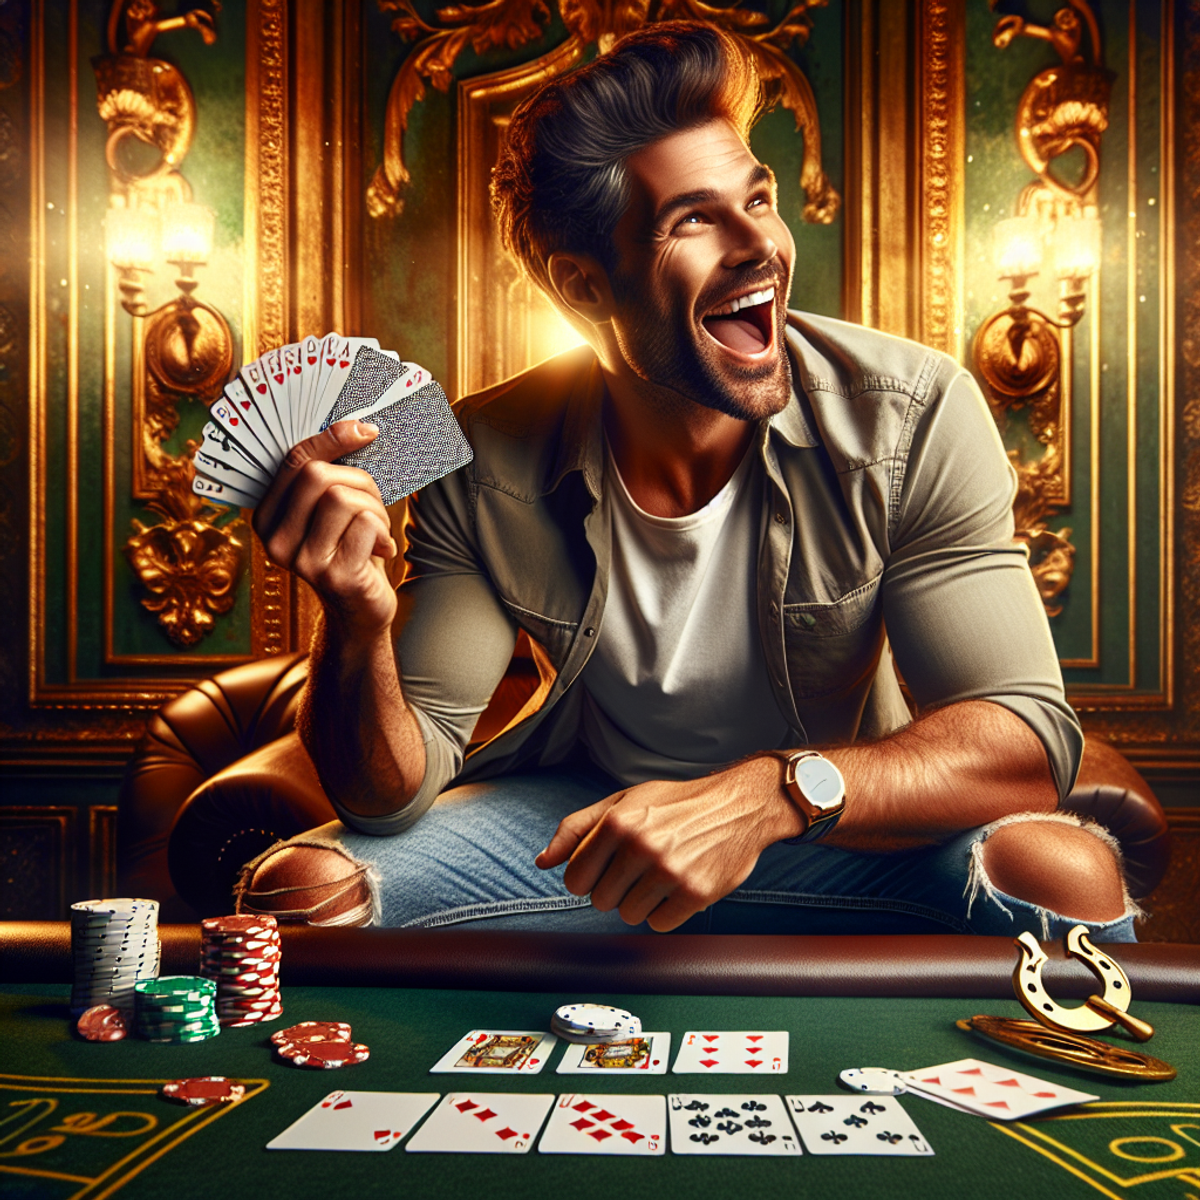 A man sitting at a table holding playing cards, surrounded by symbols of good luck in a luxurious setting.